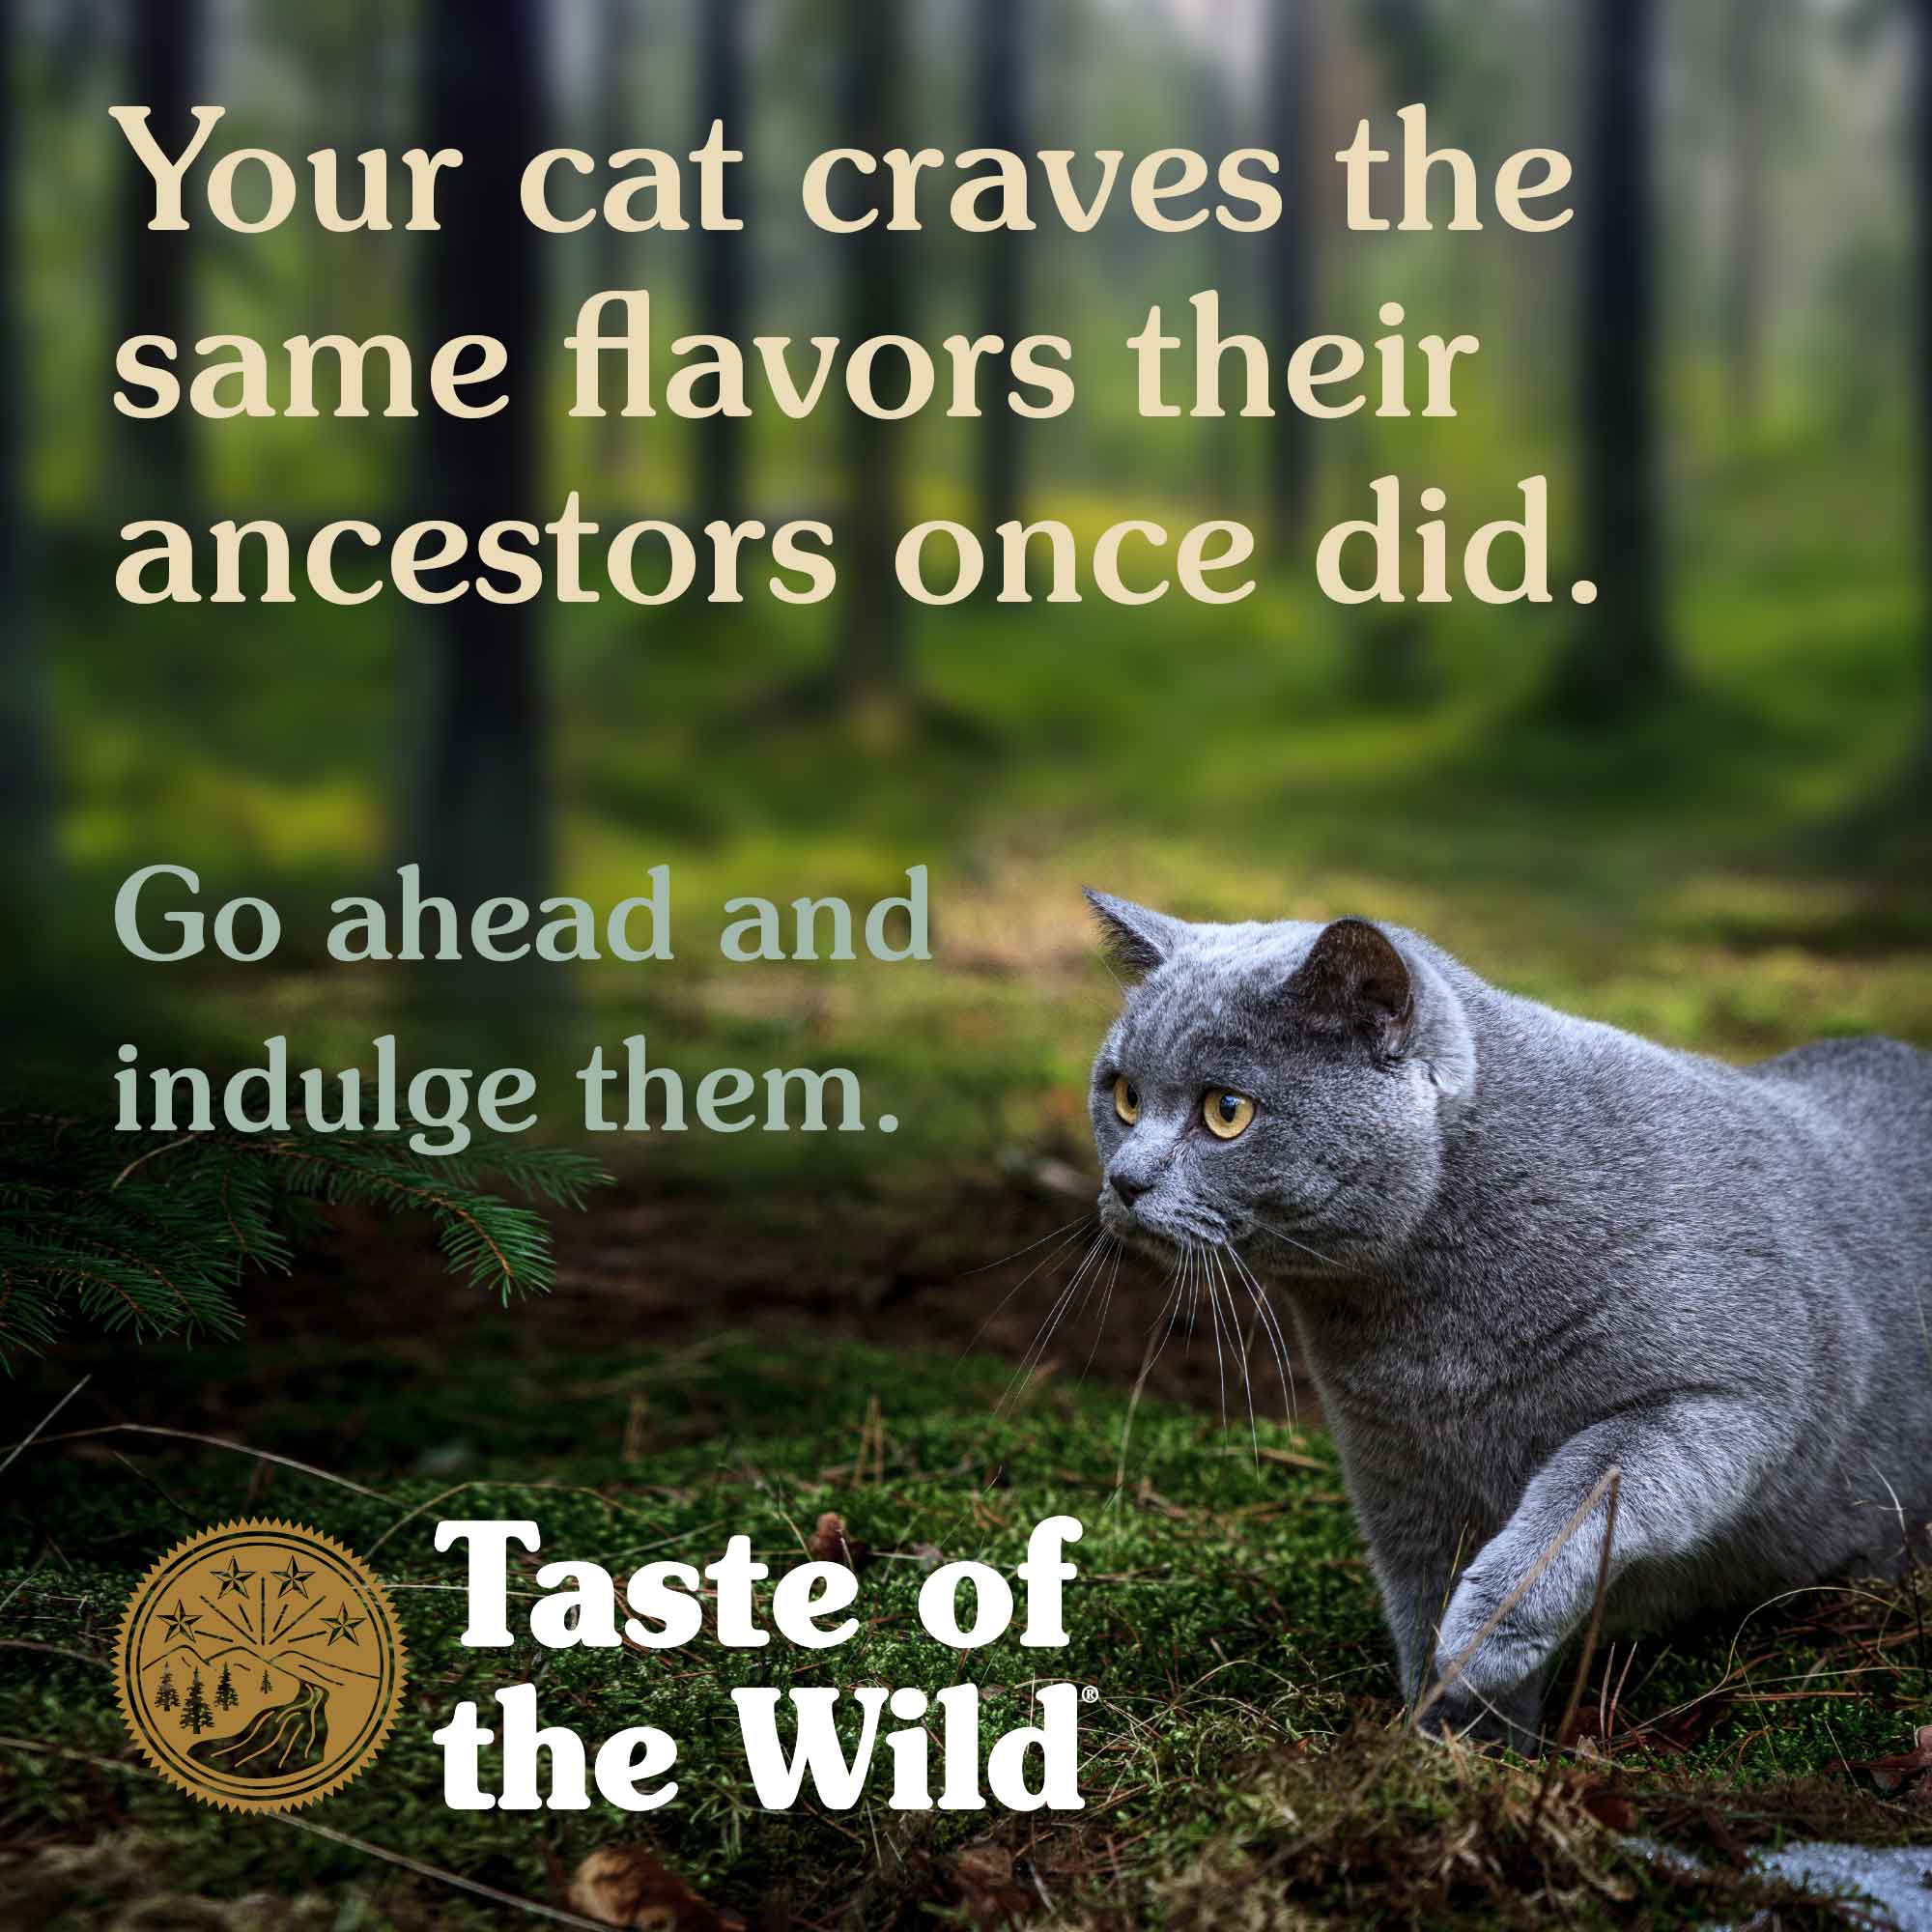 Your cat craves the same flavors their ancestors once did | Taste of the Wild